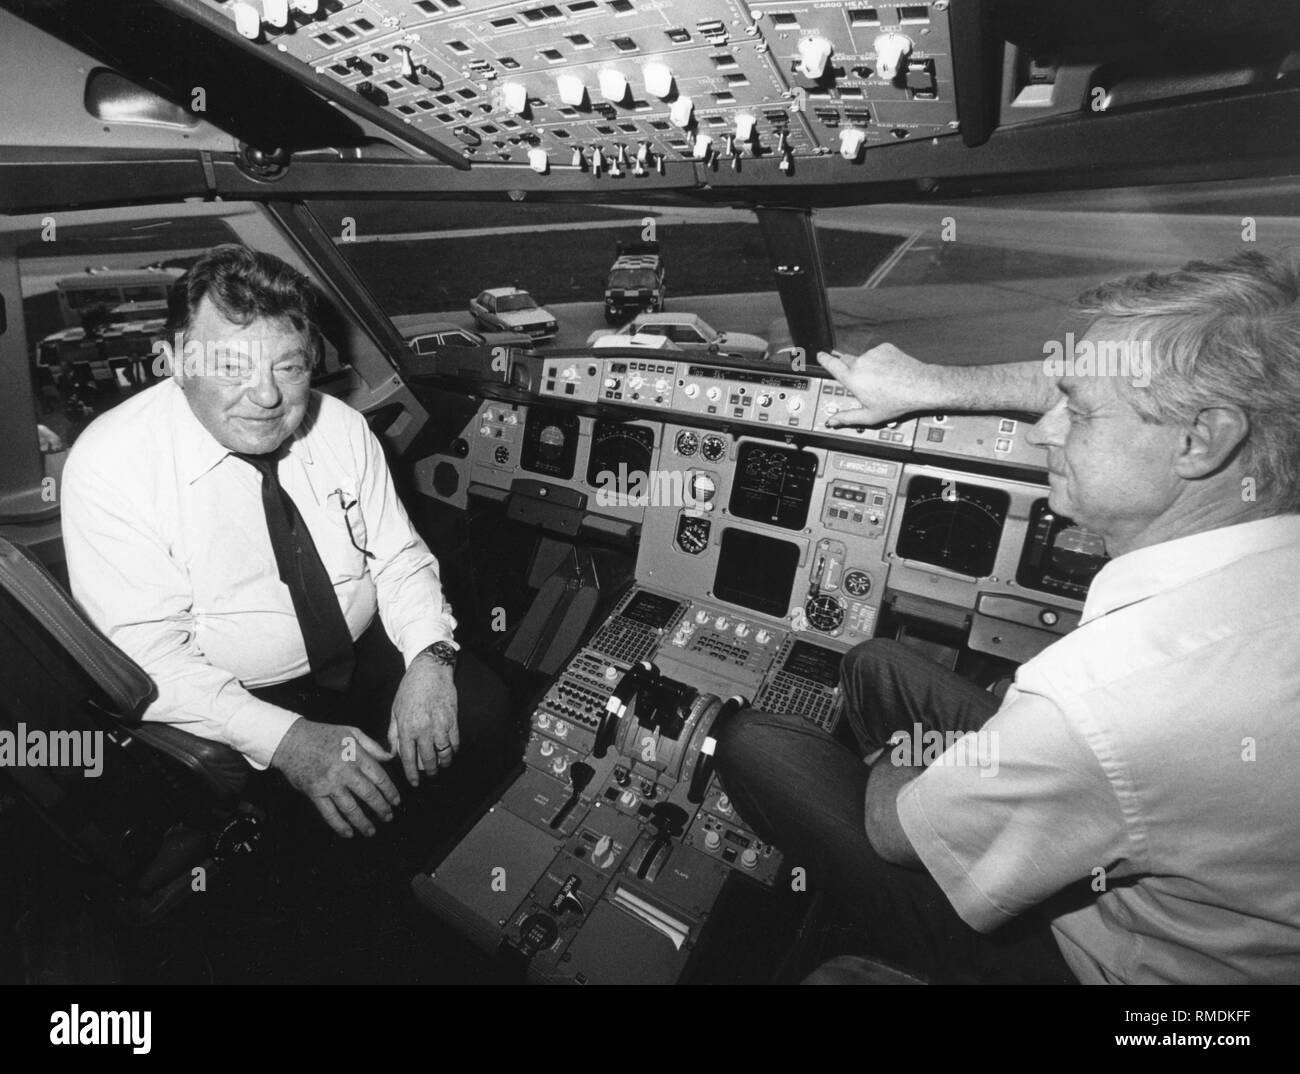 Franz Josef Strauss as Chairman of the Supervisory Board of Airbus in the cockpit of the newly developed Airbus A 320. Stock Photo